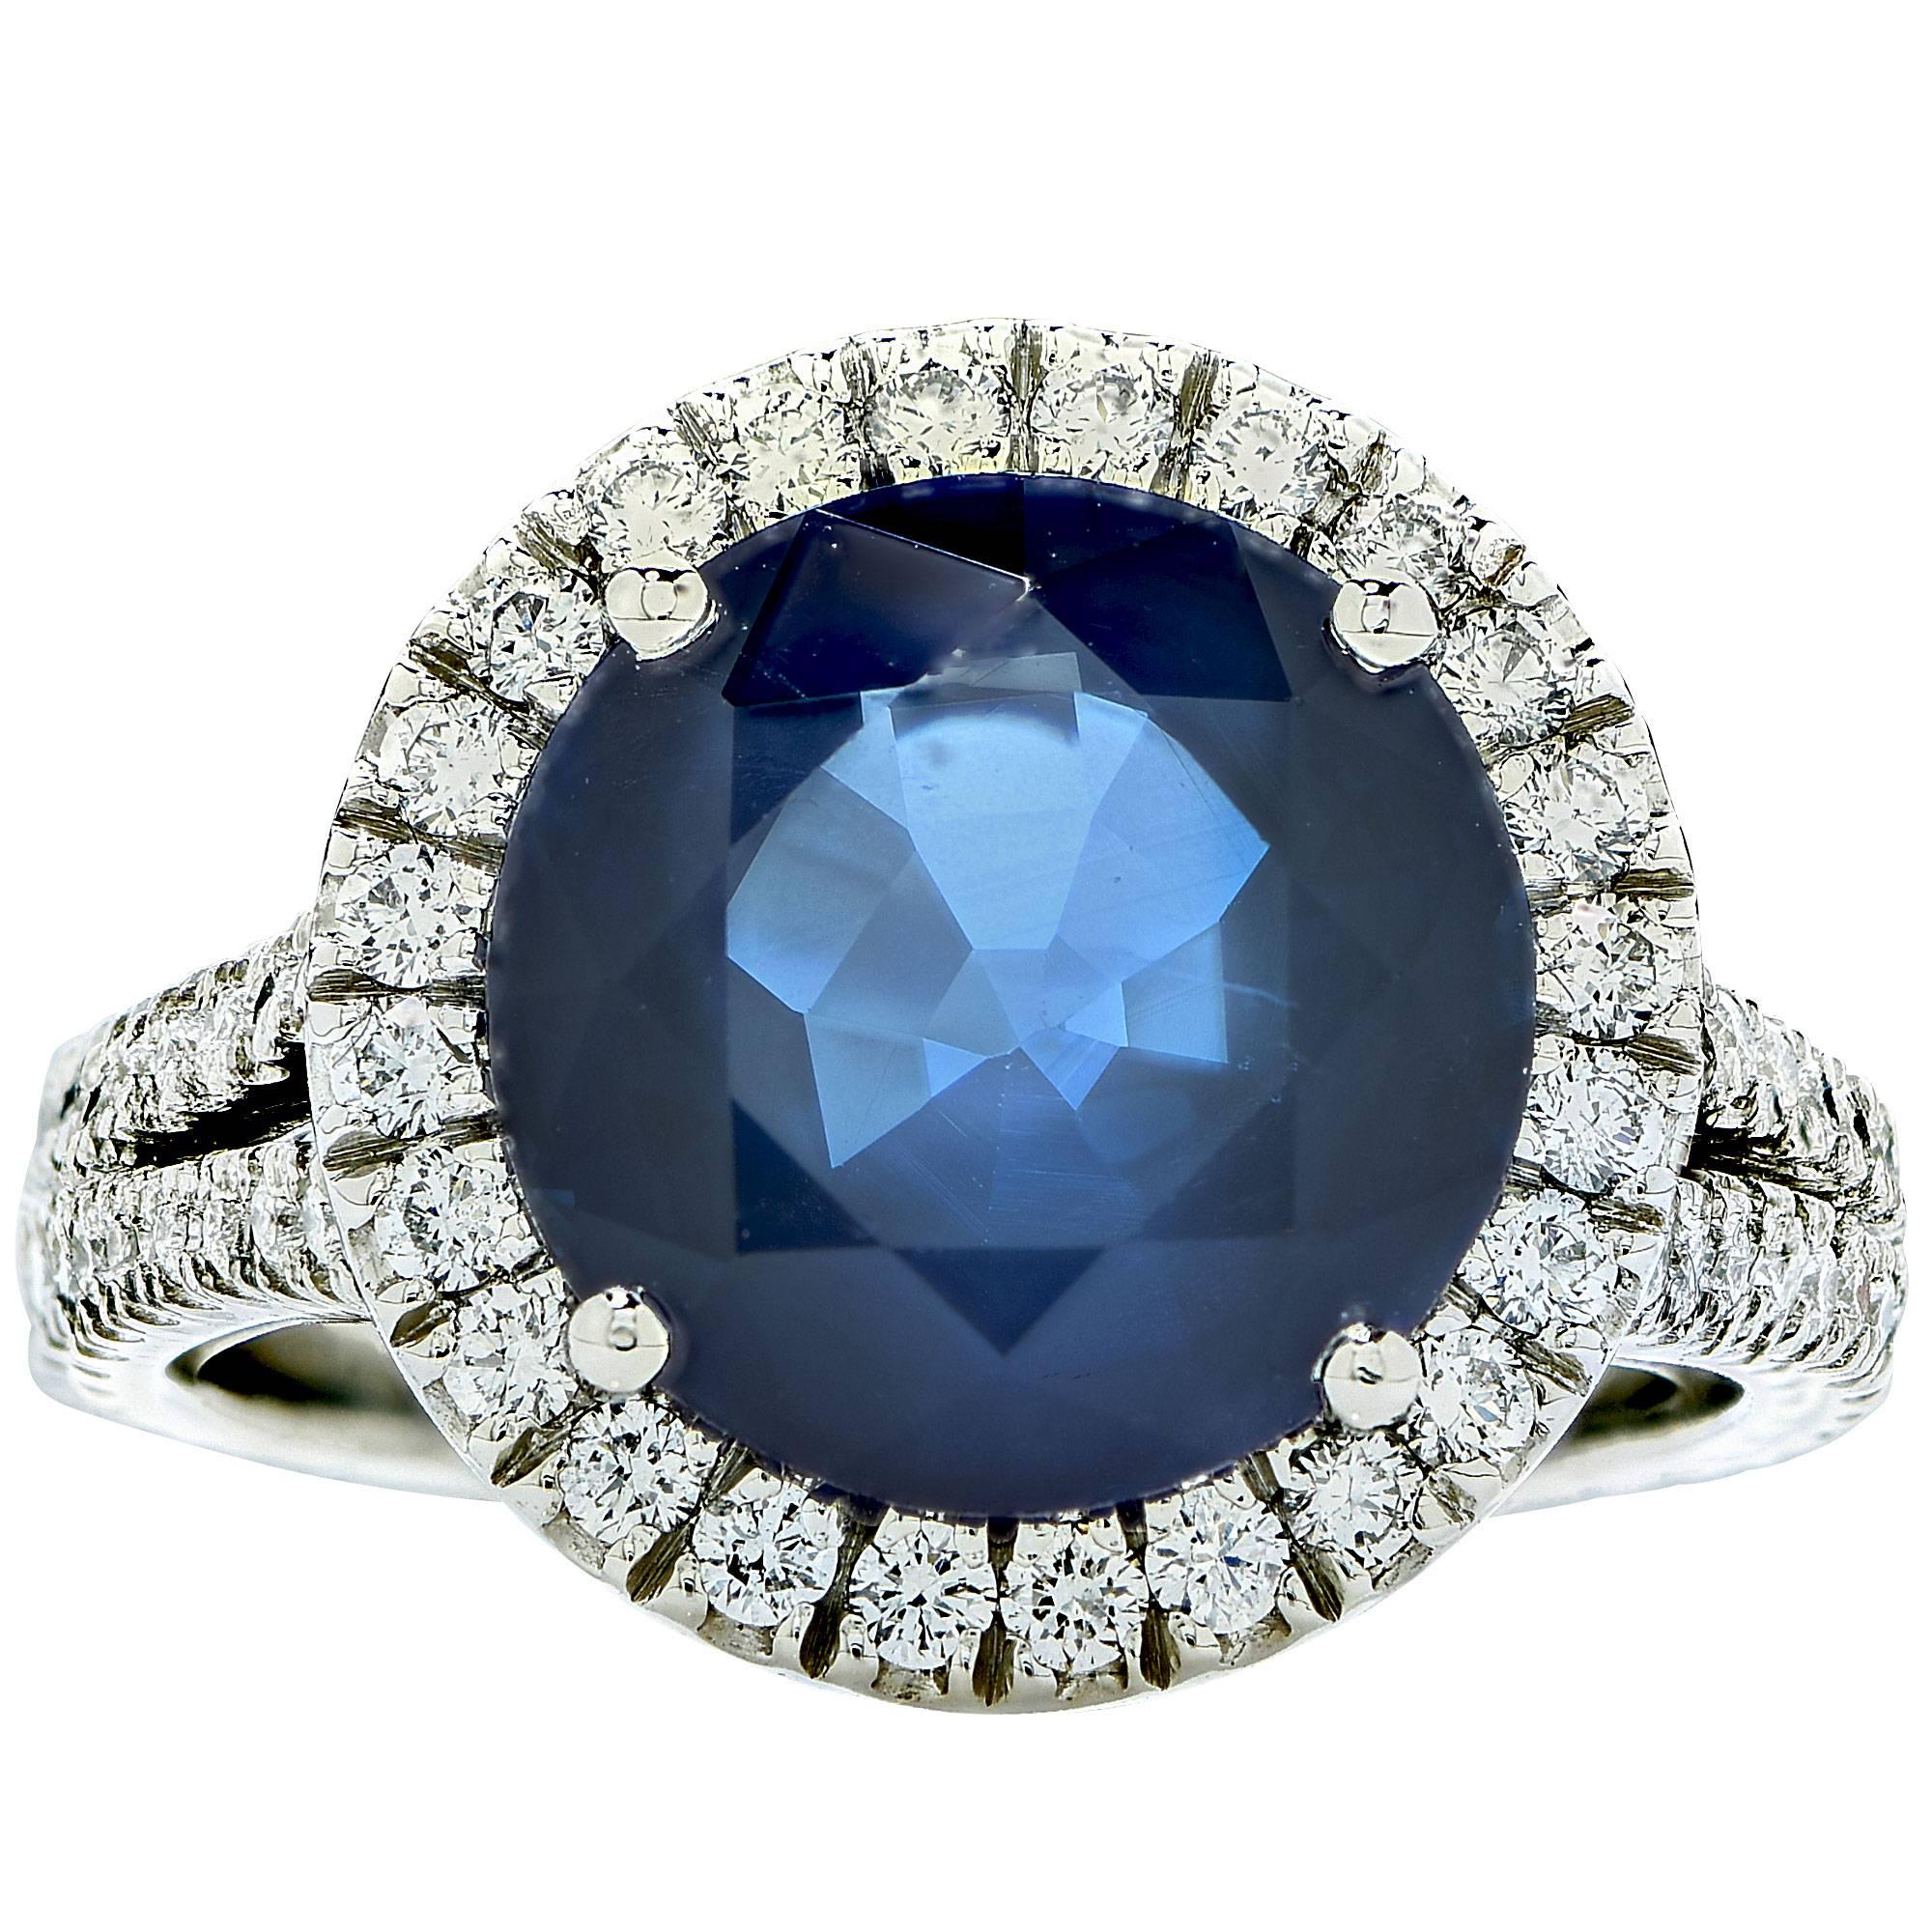 This beautiful platinum custom-made ring features a 5.93ct round cut sapphire surrounded  by .84cts of round brilliant cut diamonds, G color, VS clarity.

The ring is a size 6 and can be sized up or down.
It is stamped and tested as platinum.
The